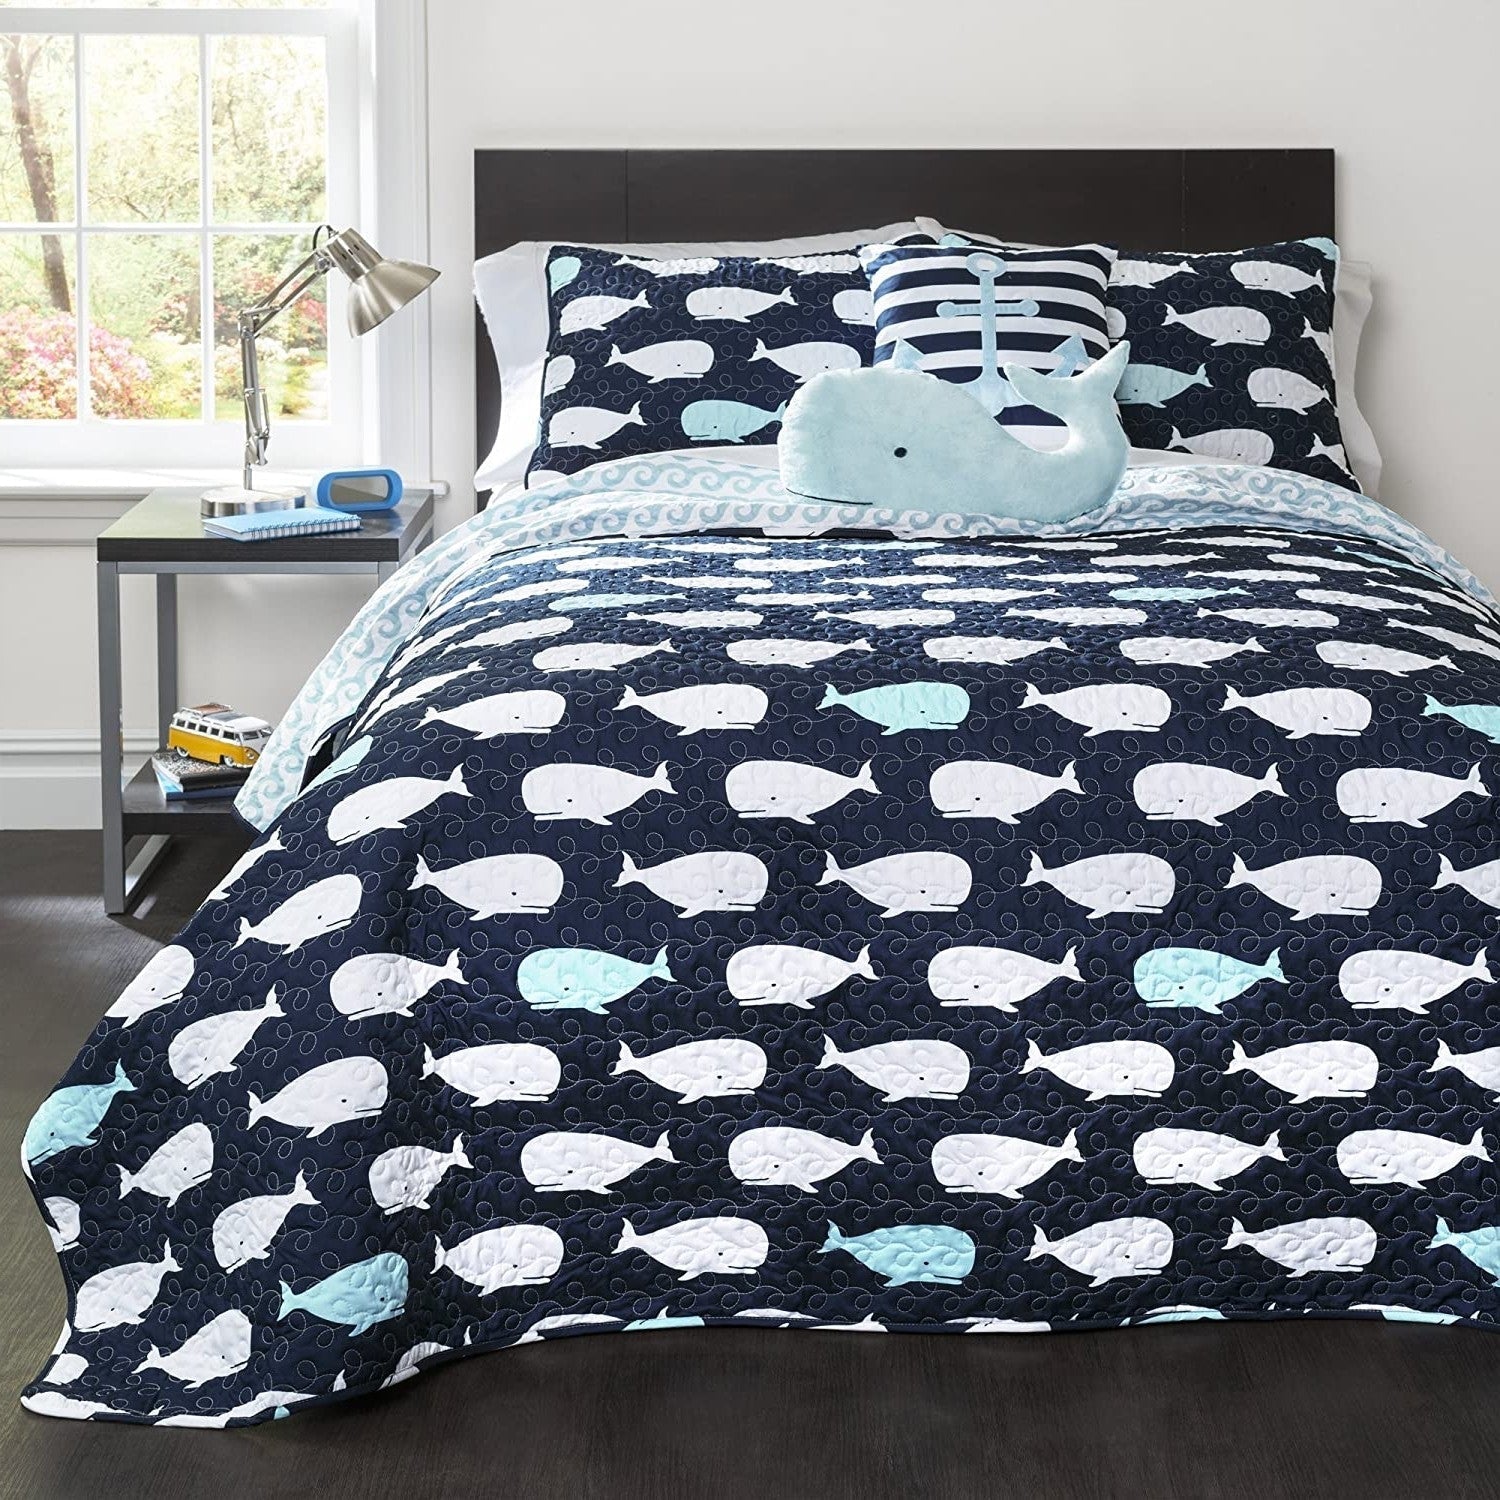 Bedroom > Quilts & Blankets - Full/Queen 5 Piece Bed In A Bag Navy Teal Microfiber Waves Whales Quilt Set